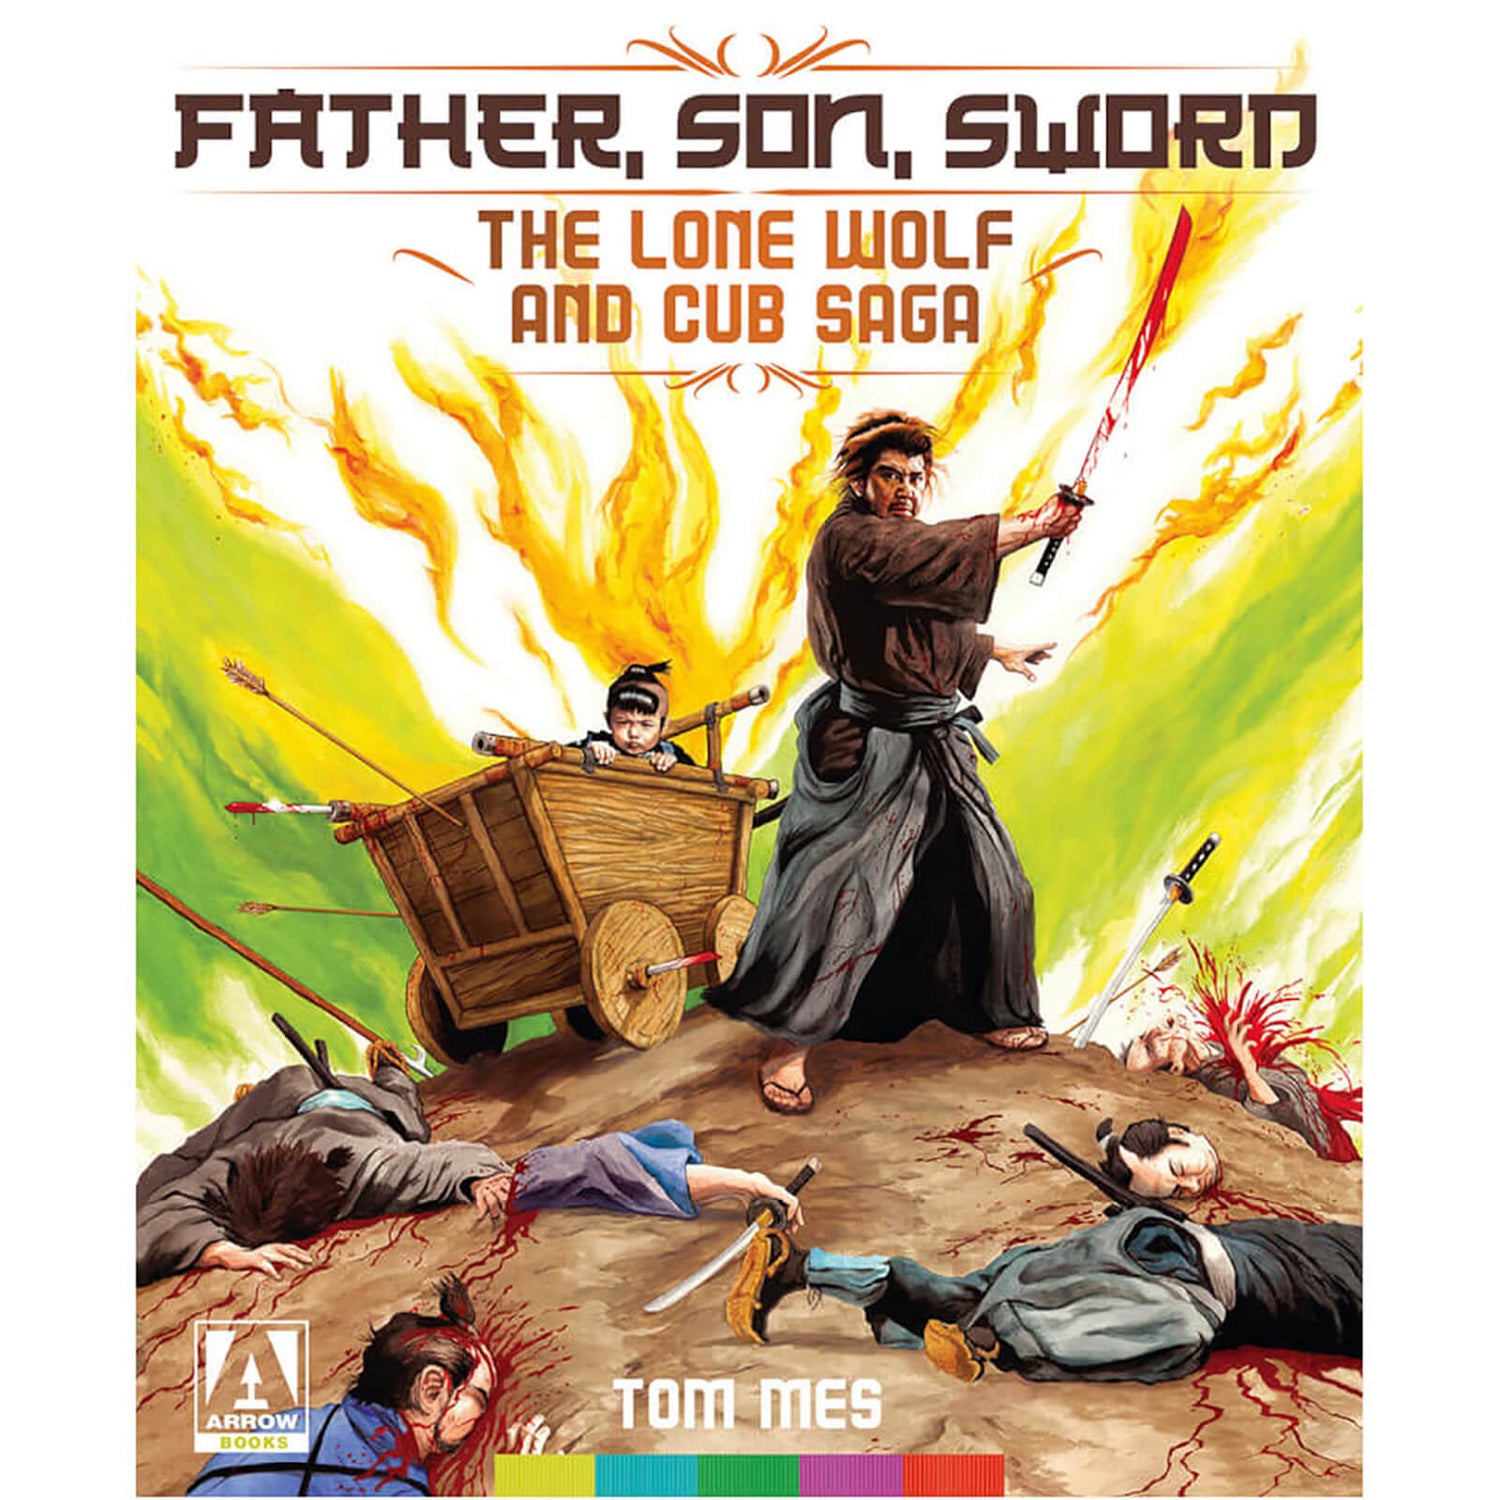 Father, Son, Sword: The Lone Wolf And Cub Saga Book